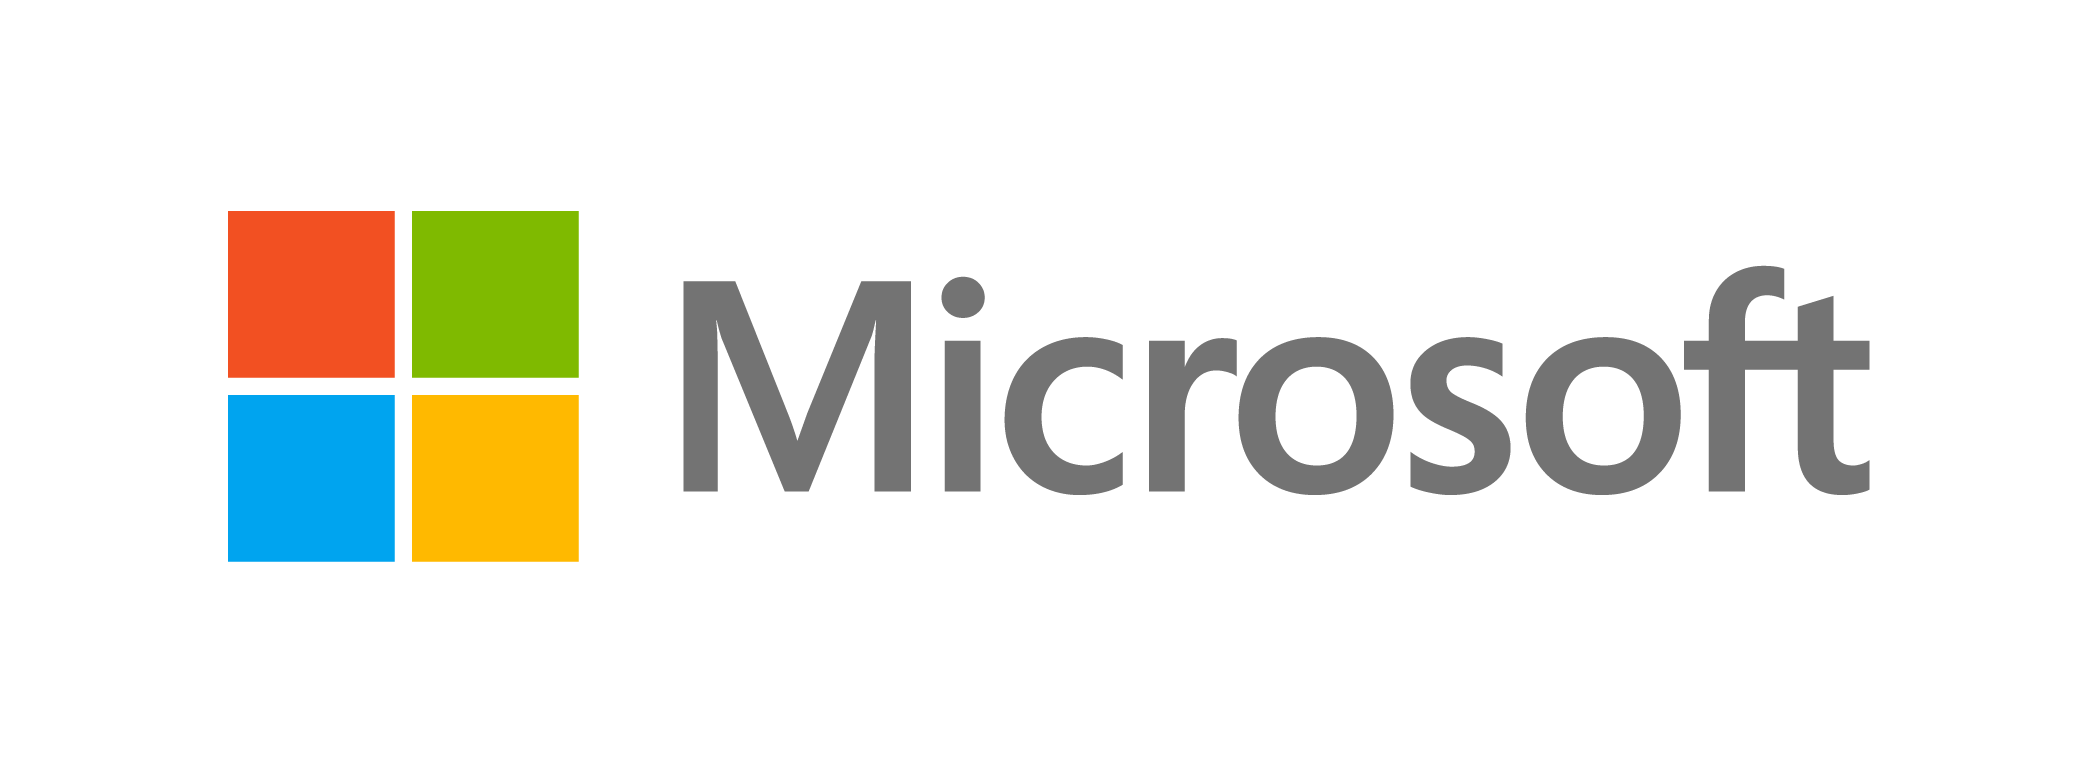 MS-50255 Managing Windows Environments With Group Policy